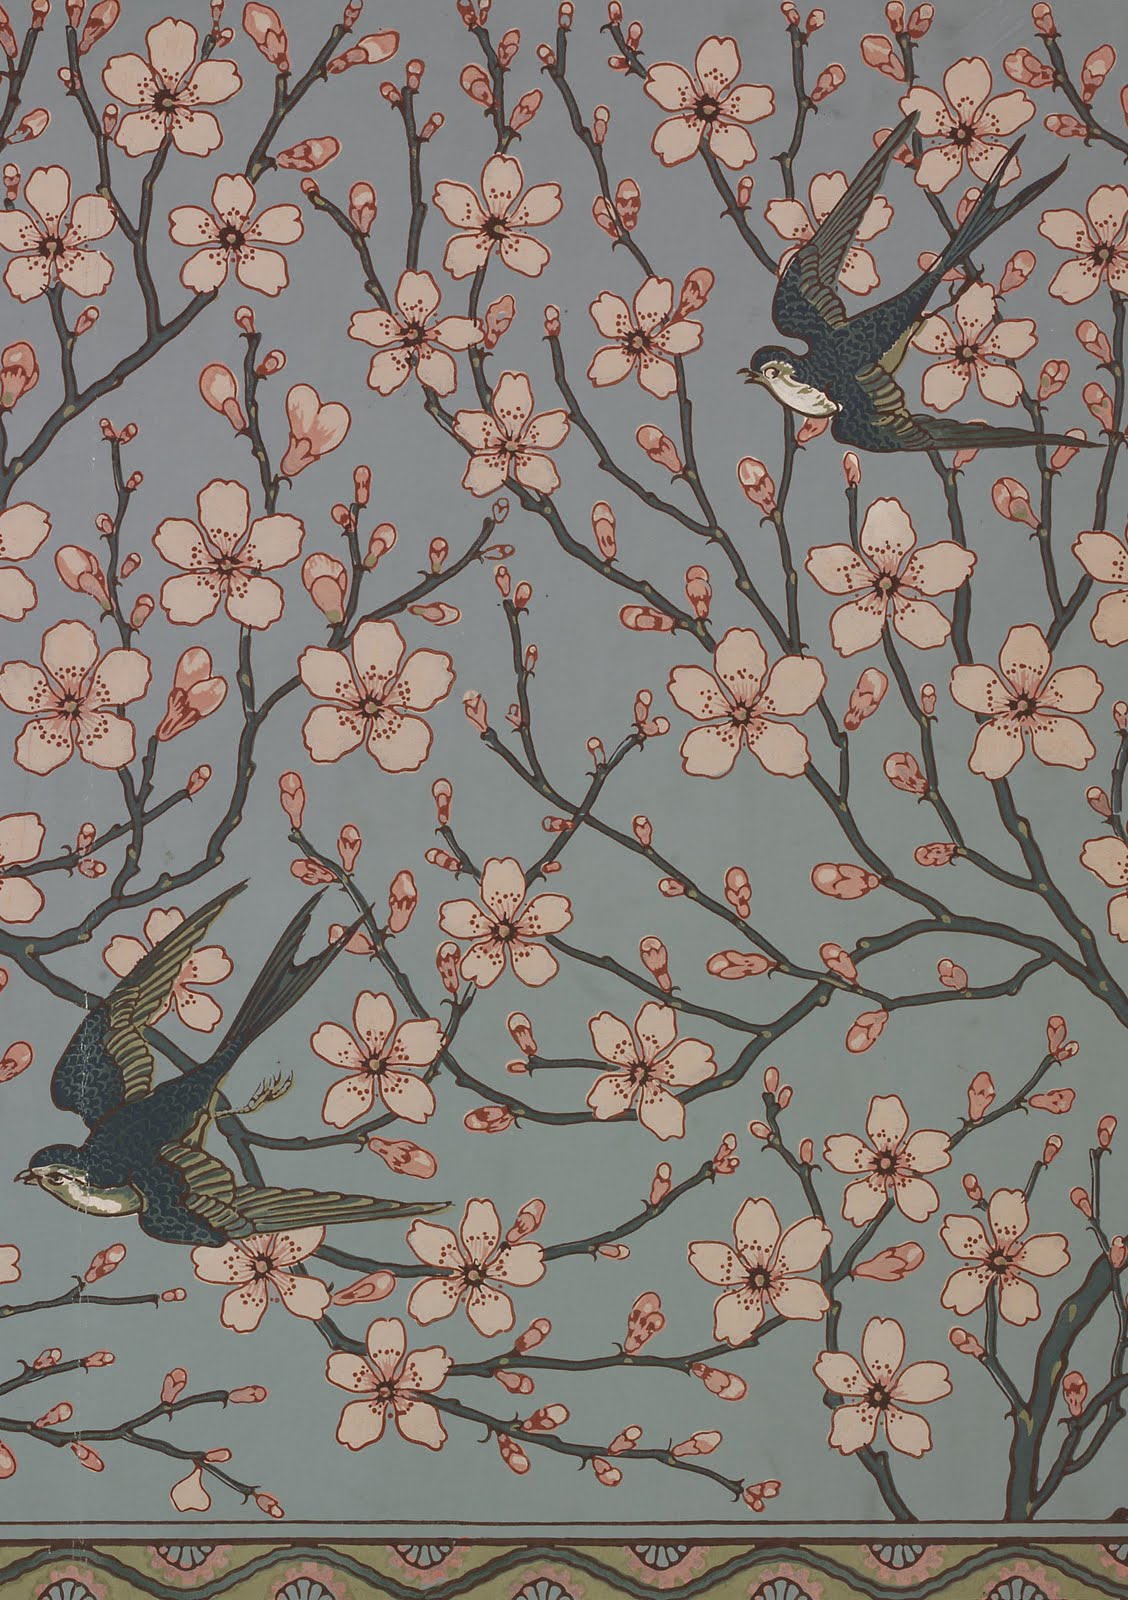 Almond Blossom and Swallow wallpaper frieze designed by Walter Crane